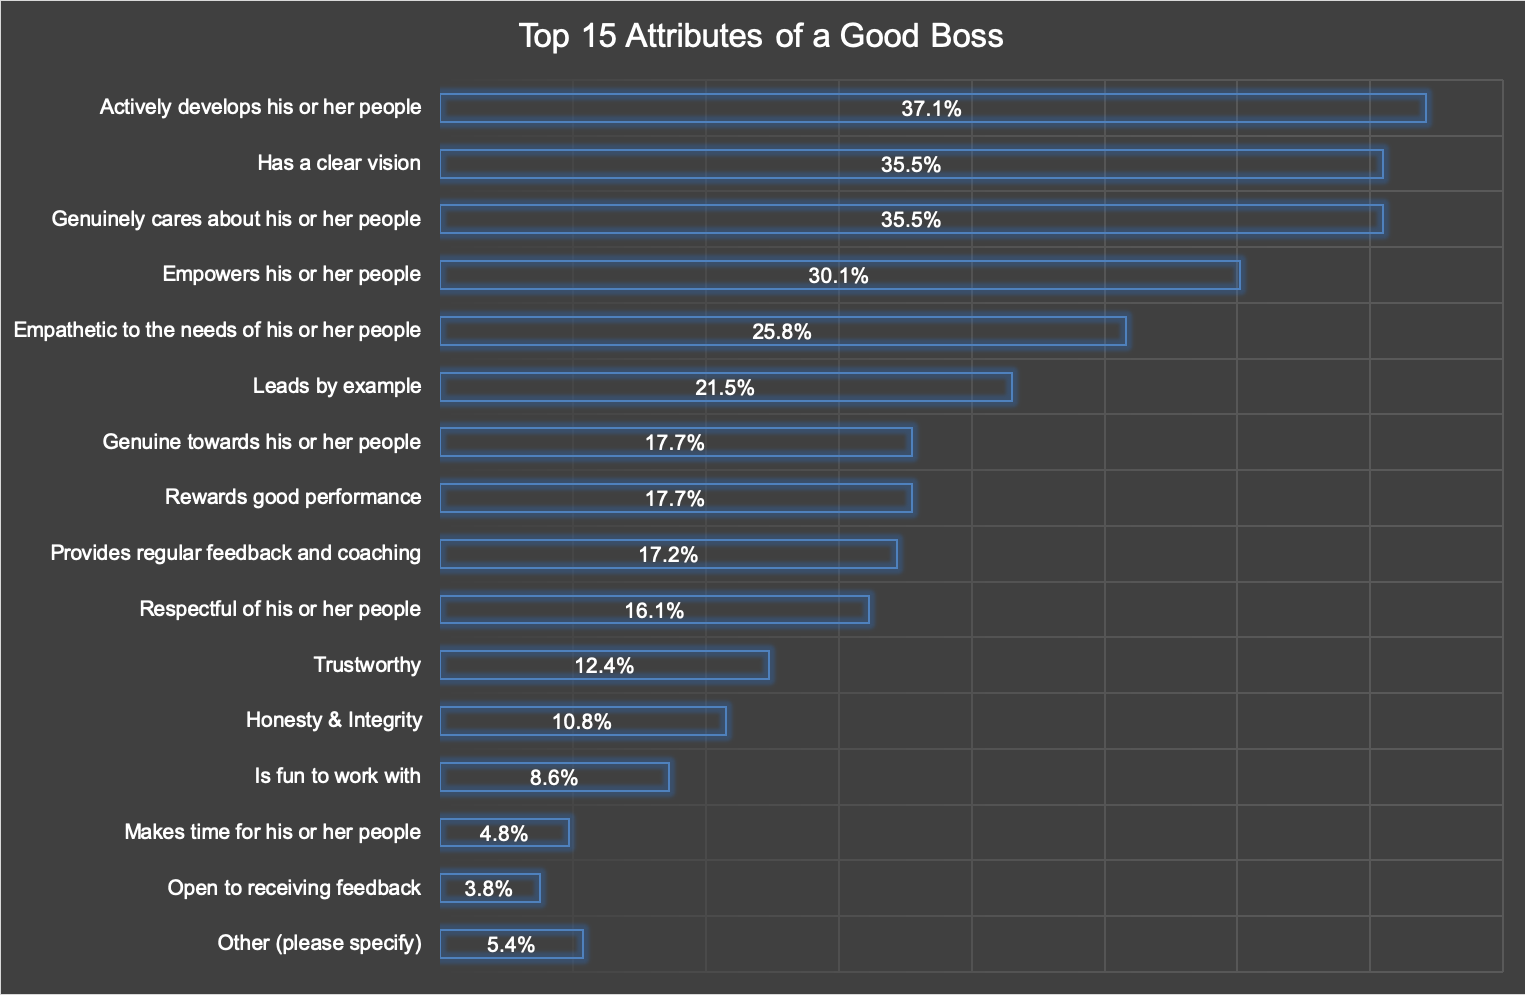 Top 15 Attributes of a Good Boss